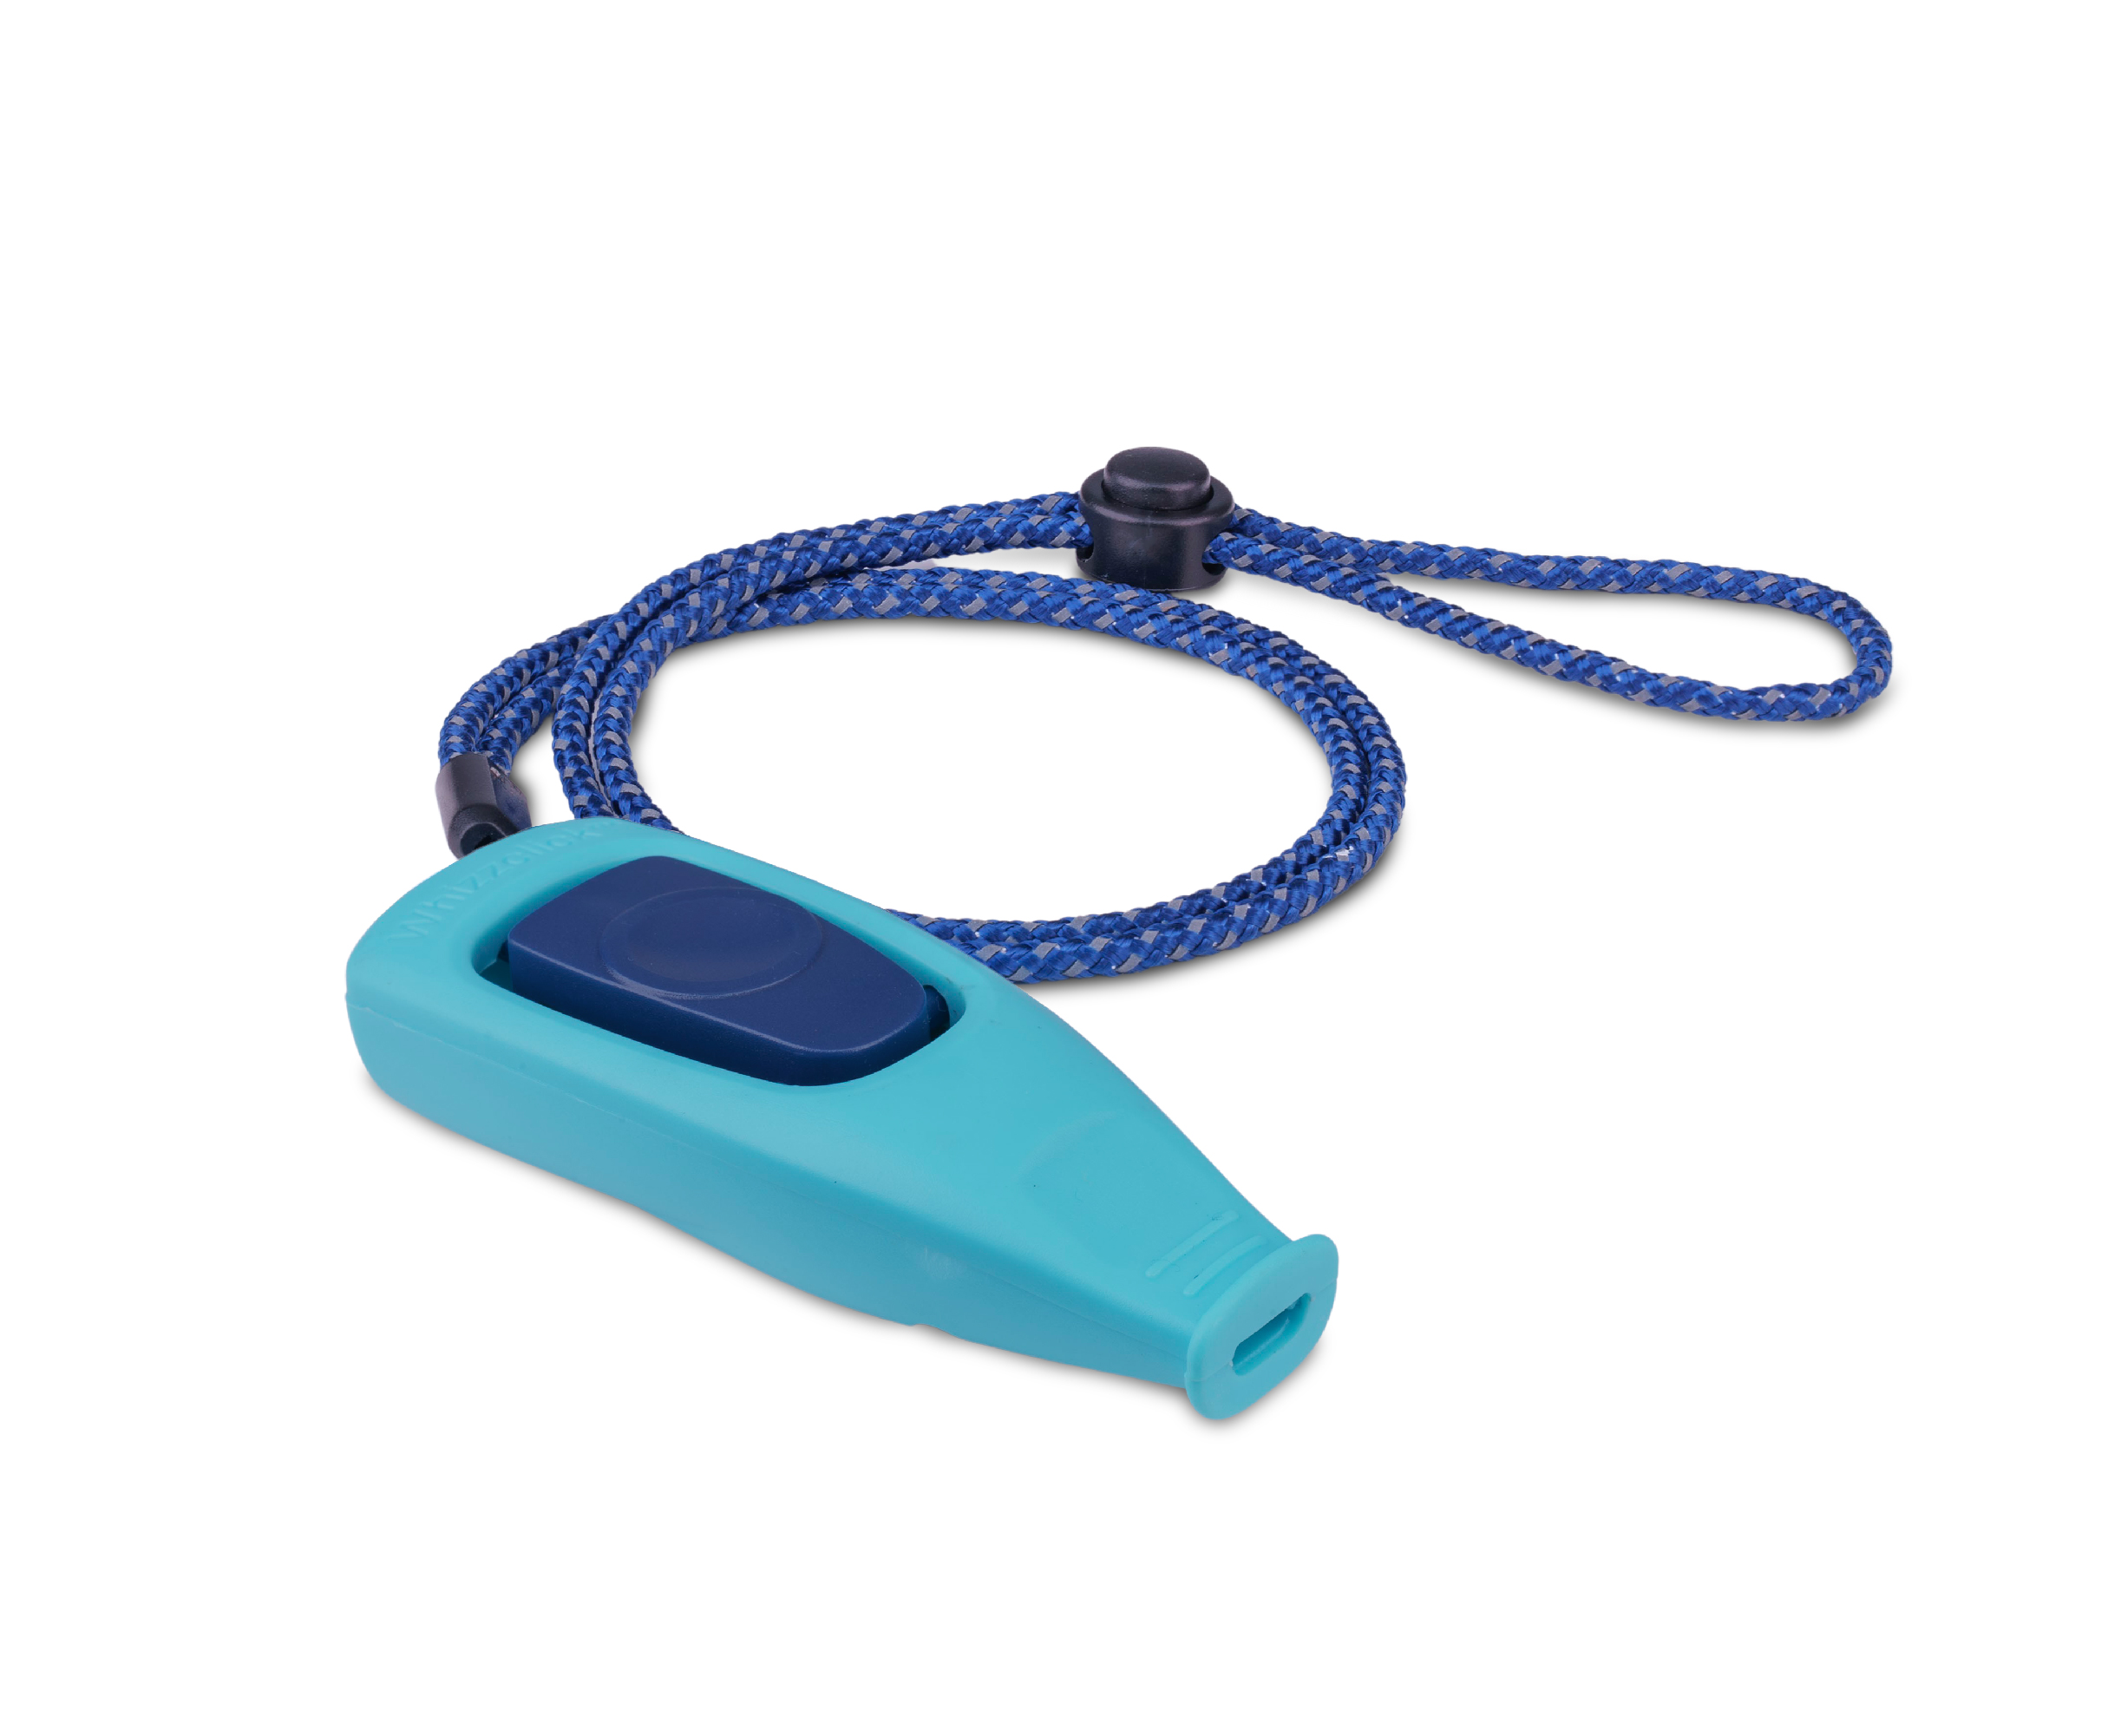 Turquoise 2-in-1 whistle and clicker